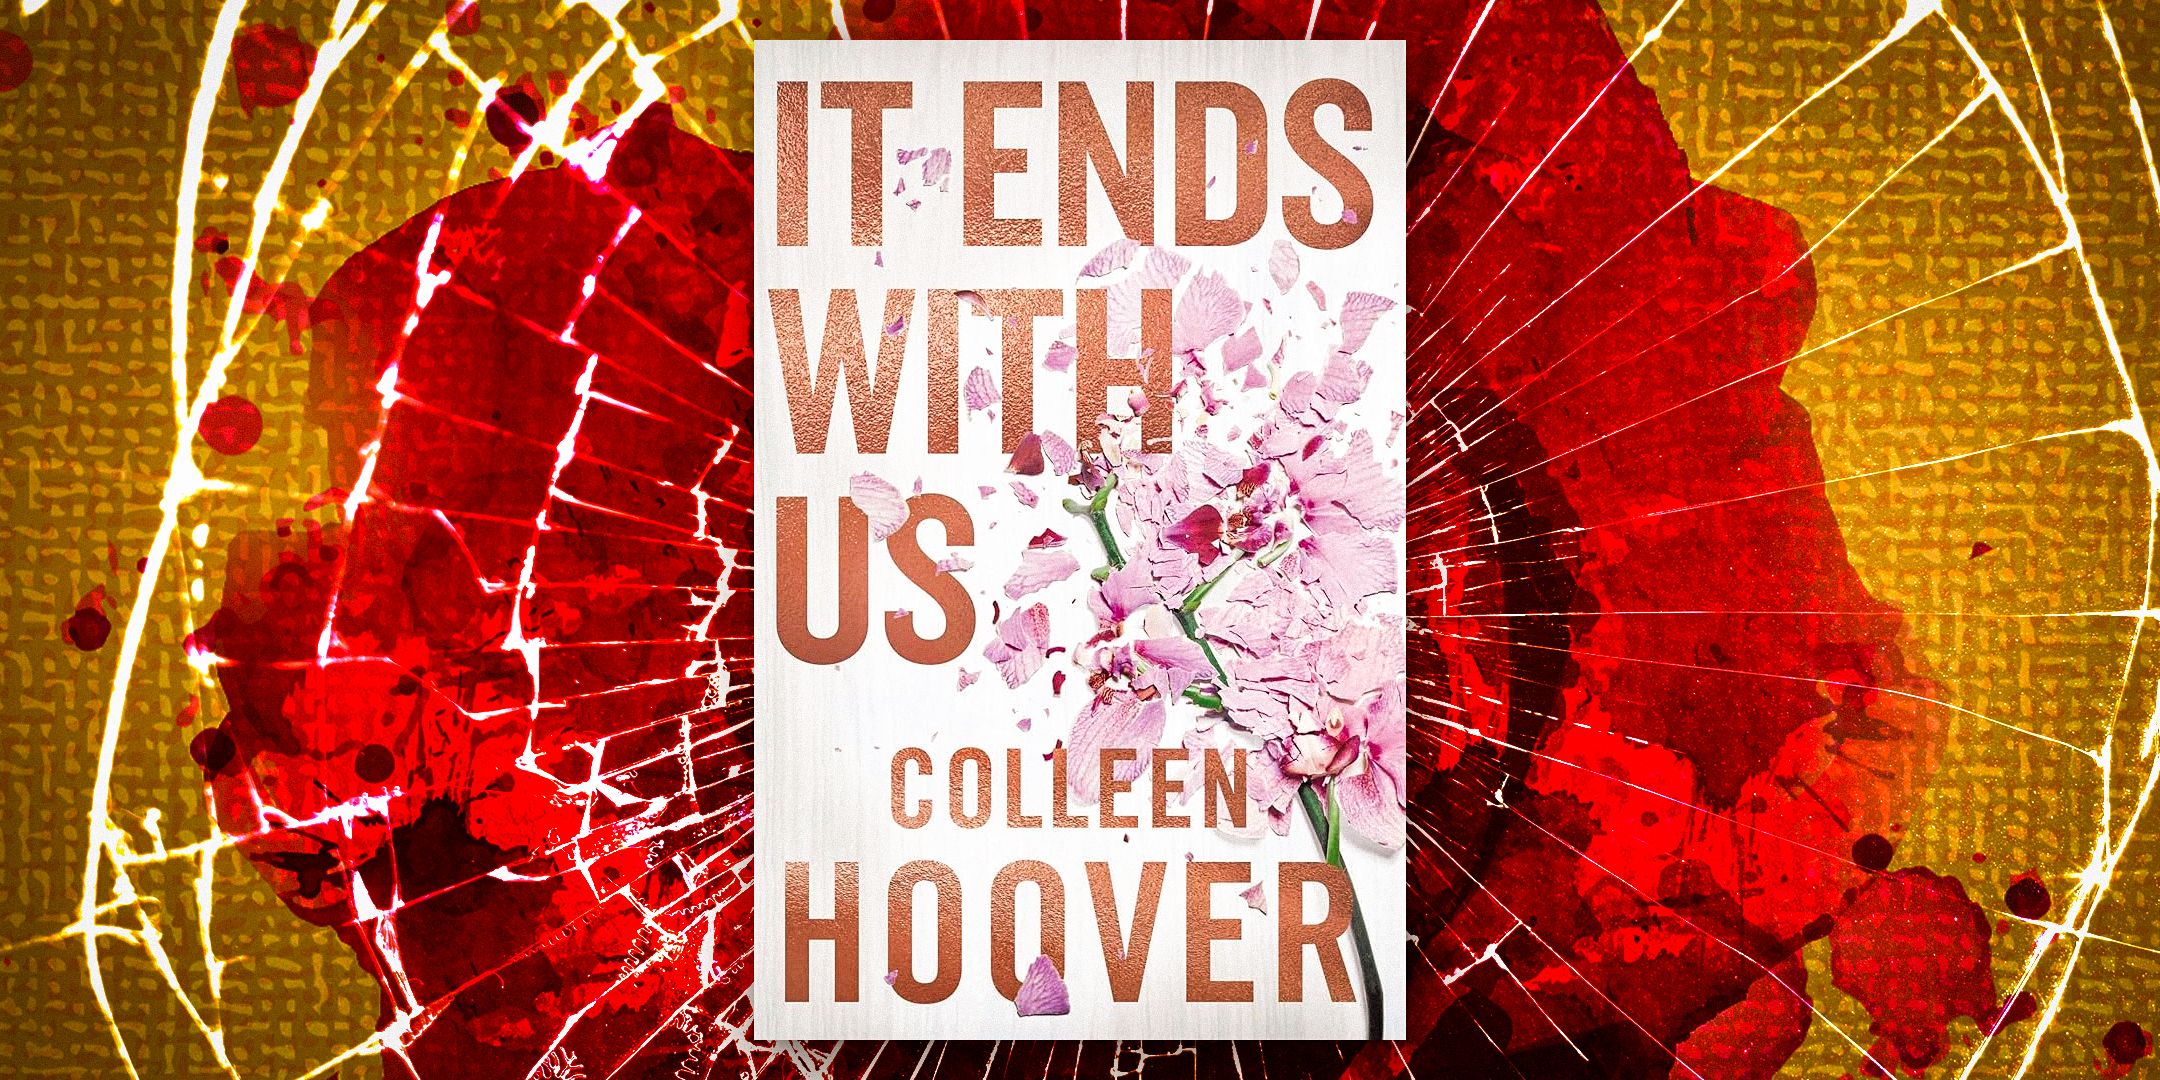 Why Colleen Hoover’s 2016 book is so controversial